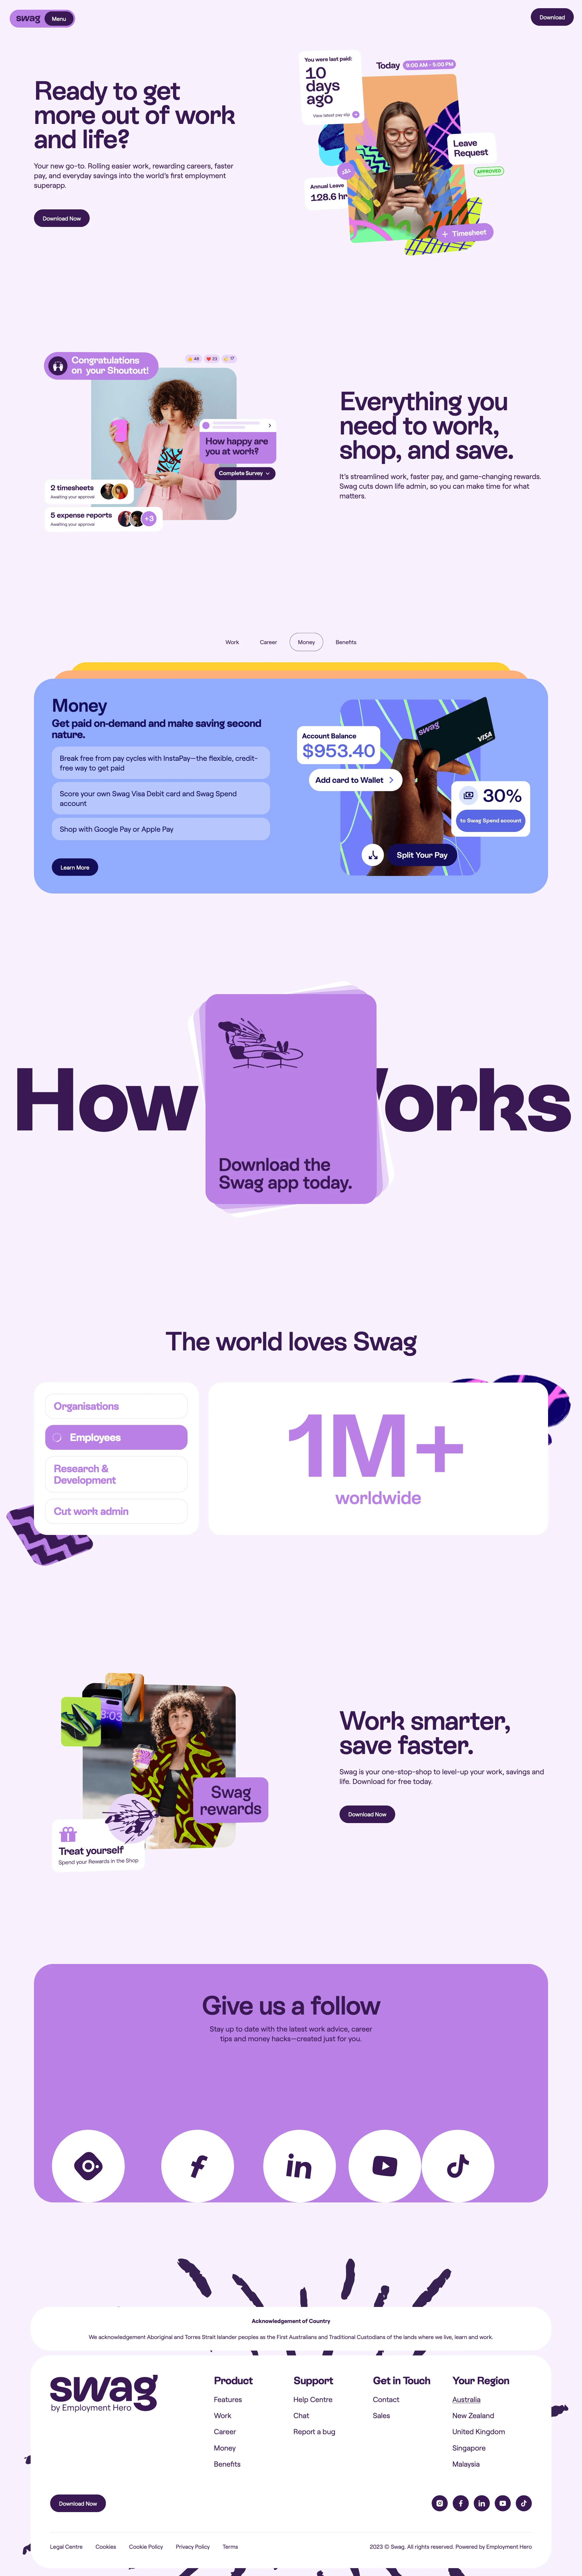 Swag Landing Page Example: The all-in-one employment superapp for easier work, rewarding careers, faster pay, and everyday savings. Join now and unlock game-changing rewards!